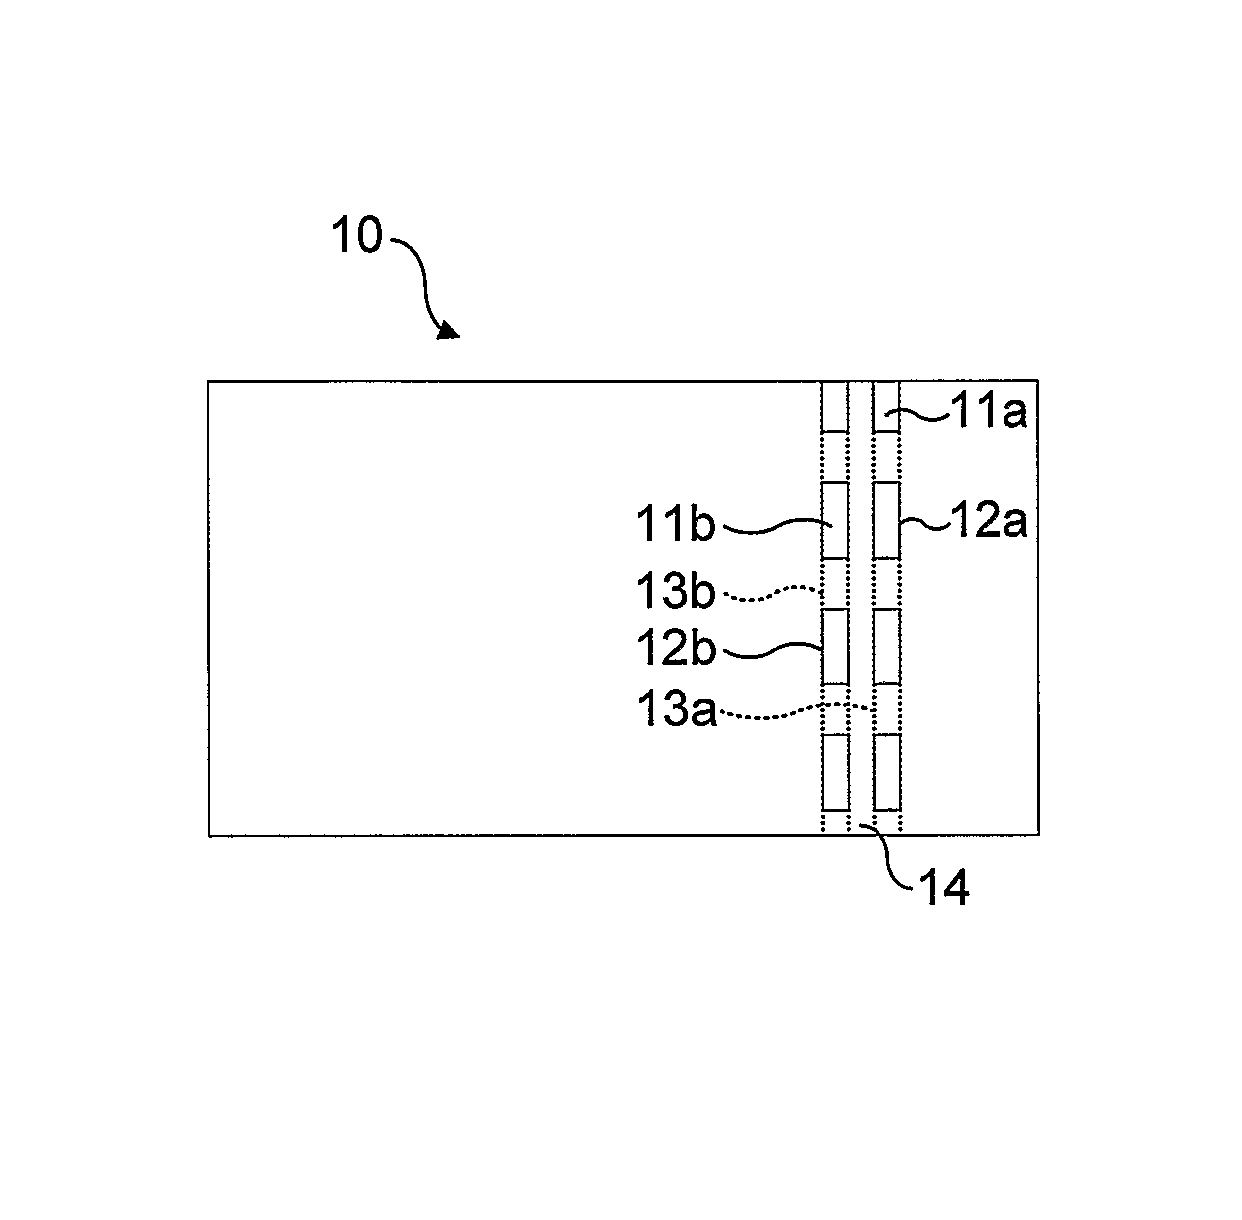 Security substrate incorporating elongate security elements